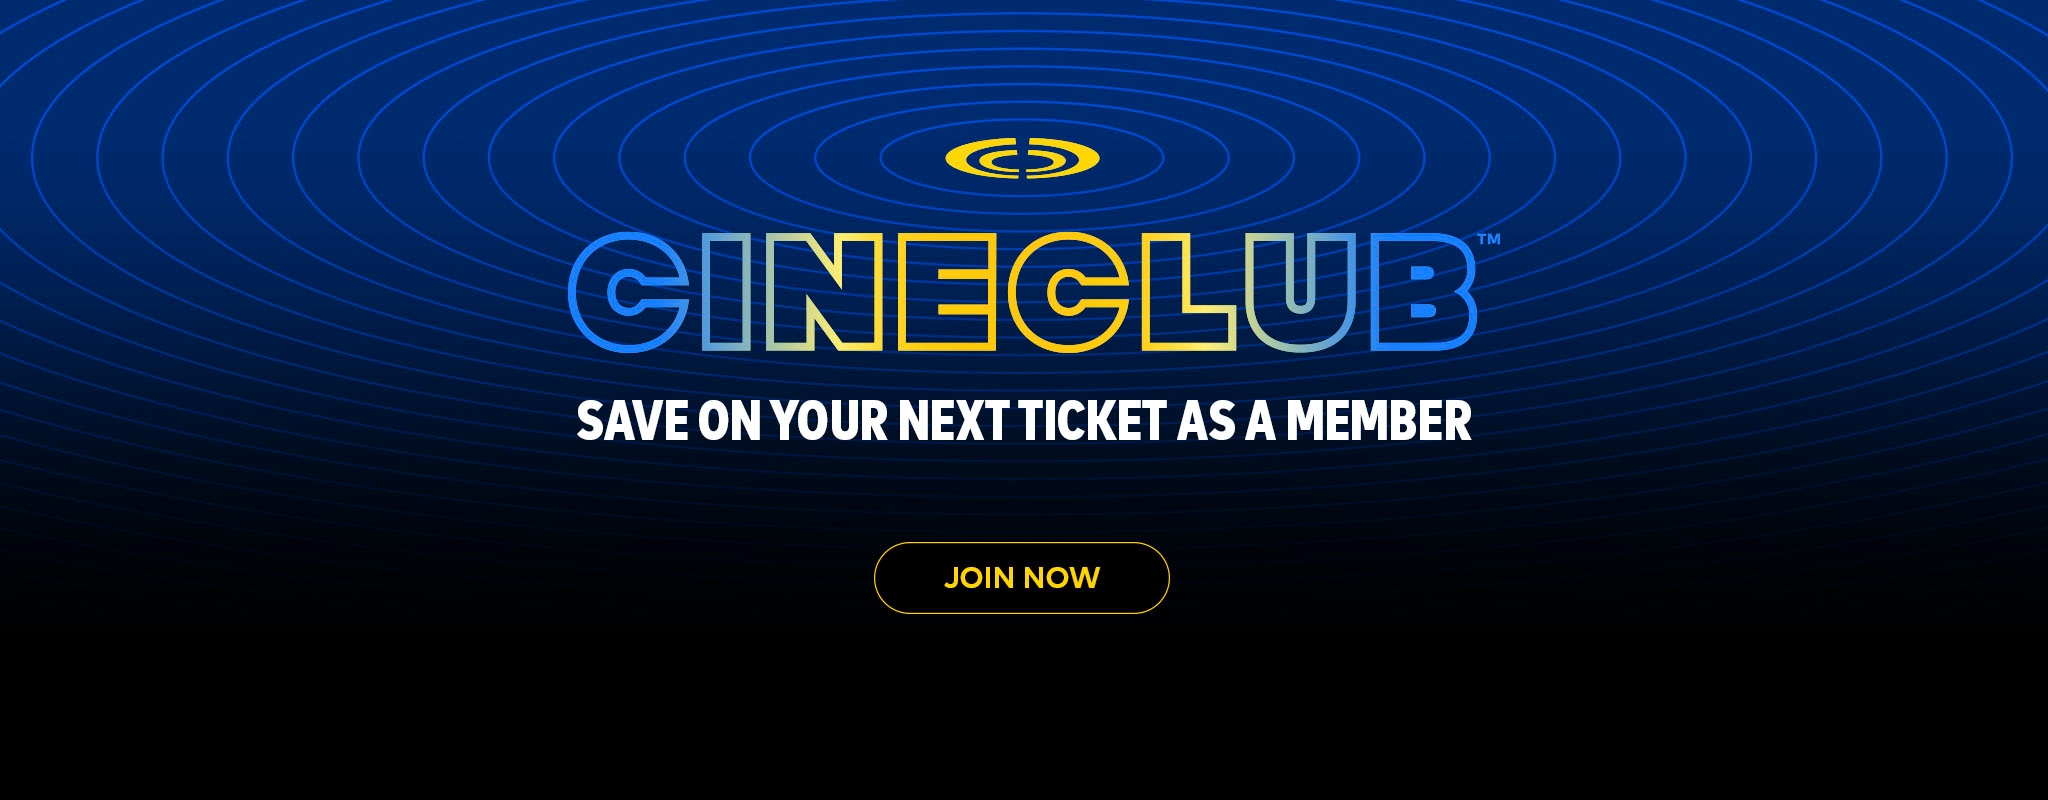 Cineclub, save on your next ticket as a member. Join now.